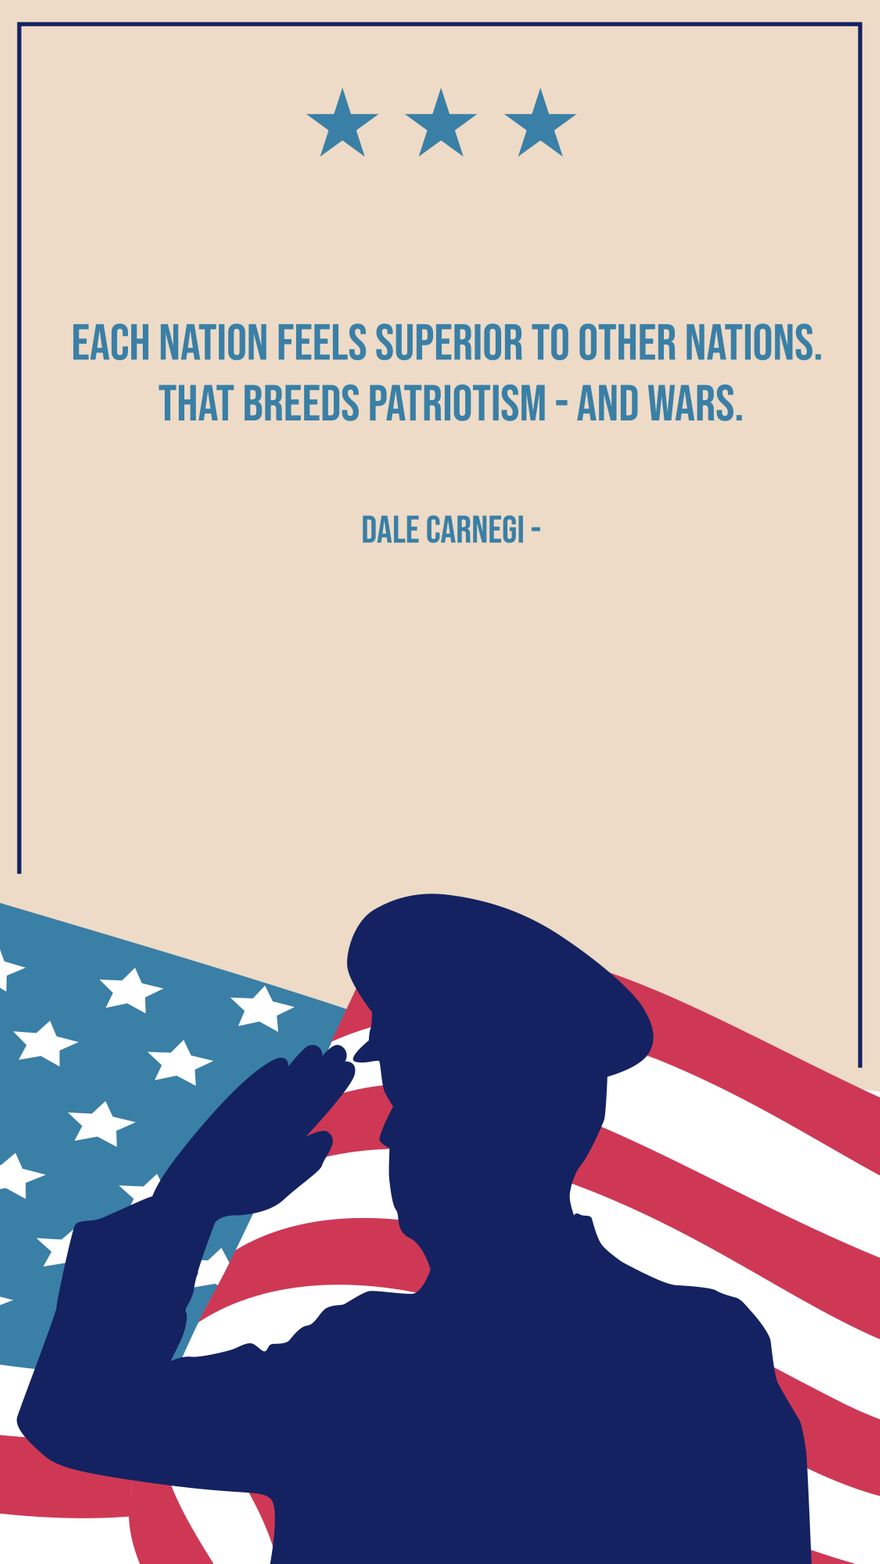 Free Dale Carnegi - Each nation feels superior to other nations. That breeds patriotism - and wars. in JPG